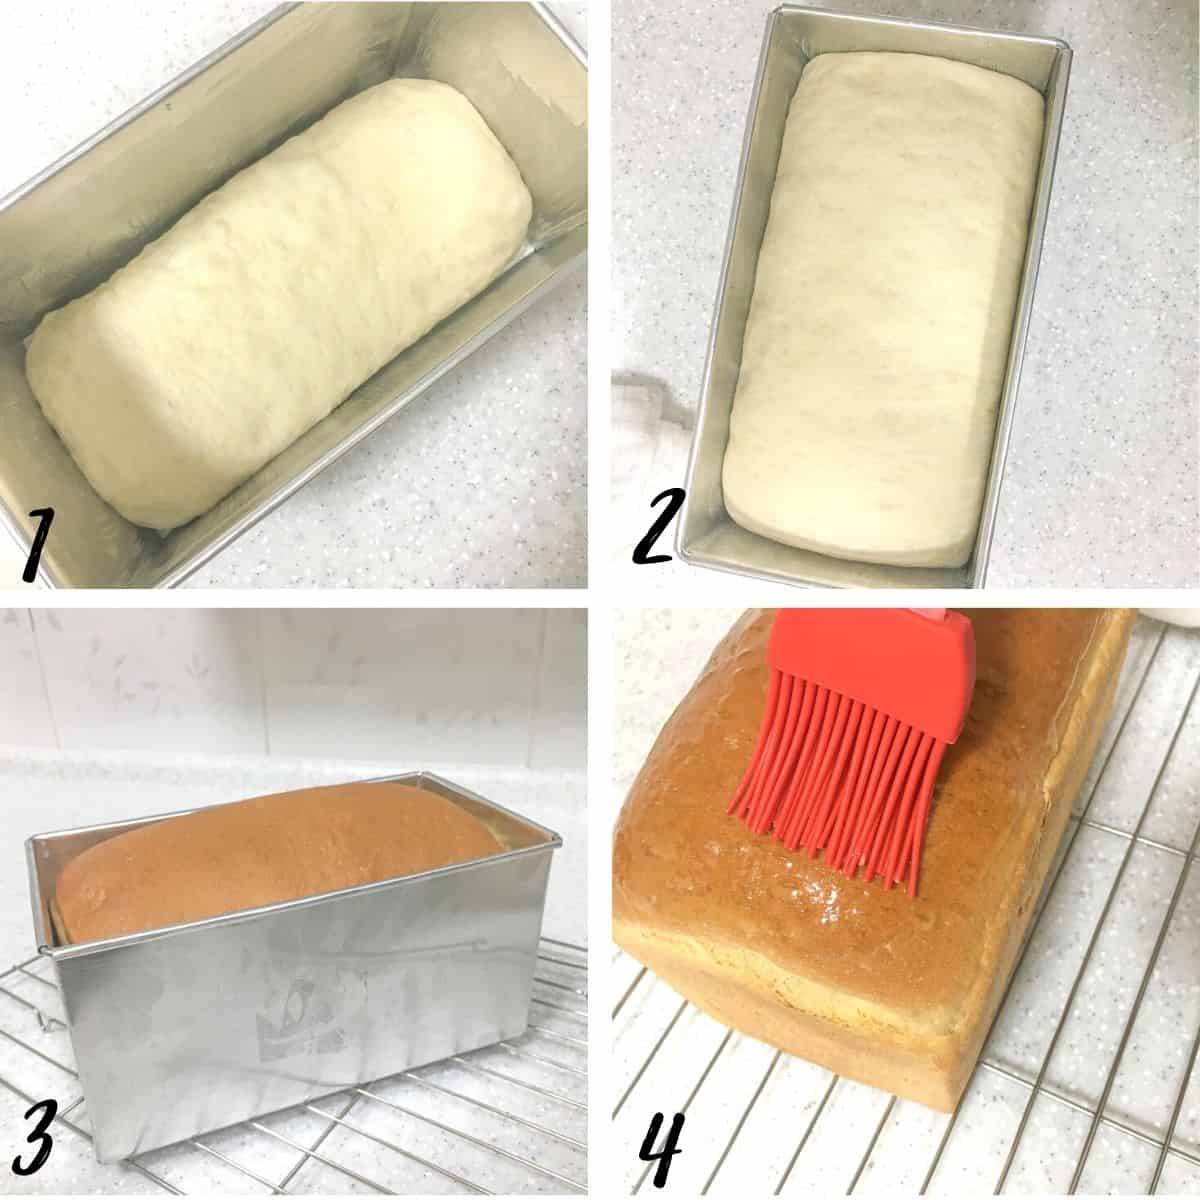 A poster of 4 images showing how to proof and bake a loaf bread, and how to apply butter after baking.